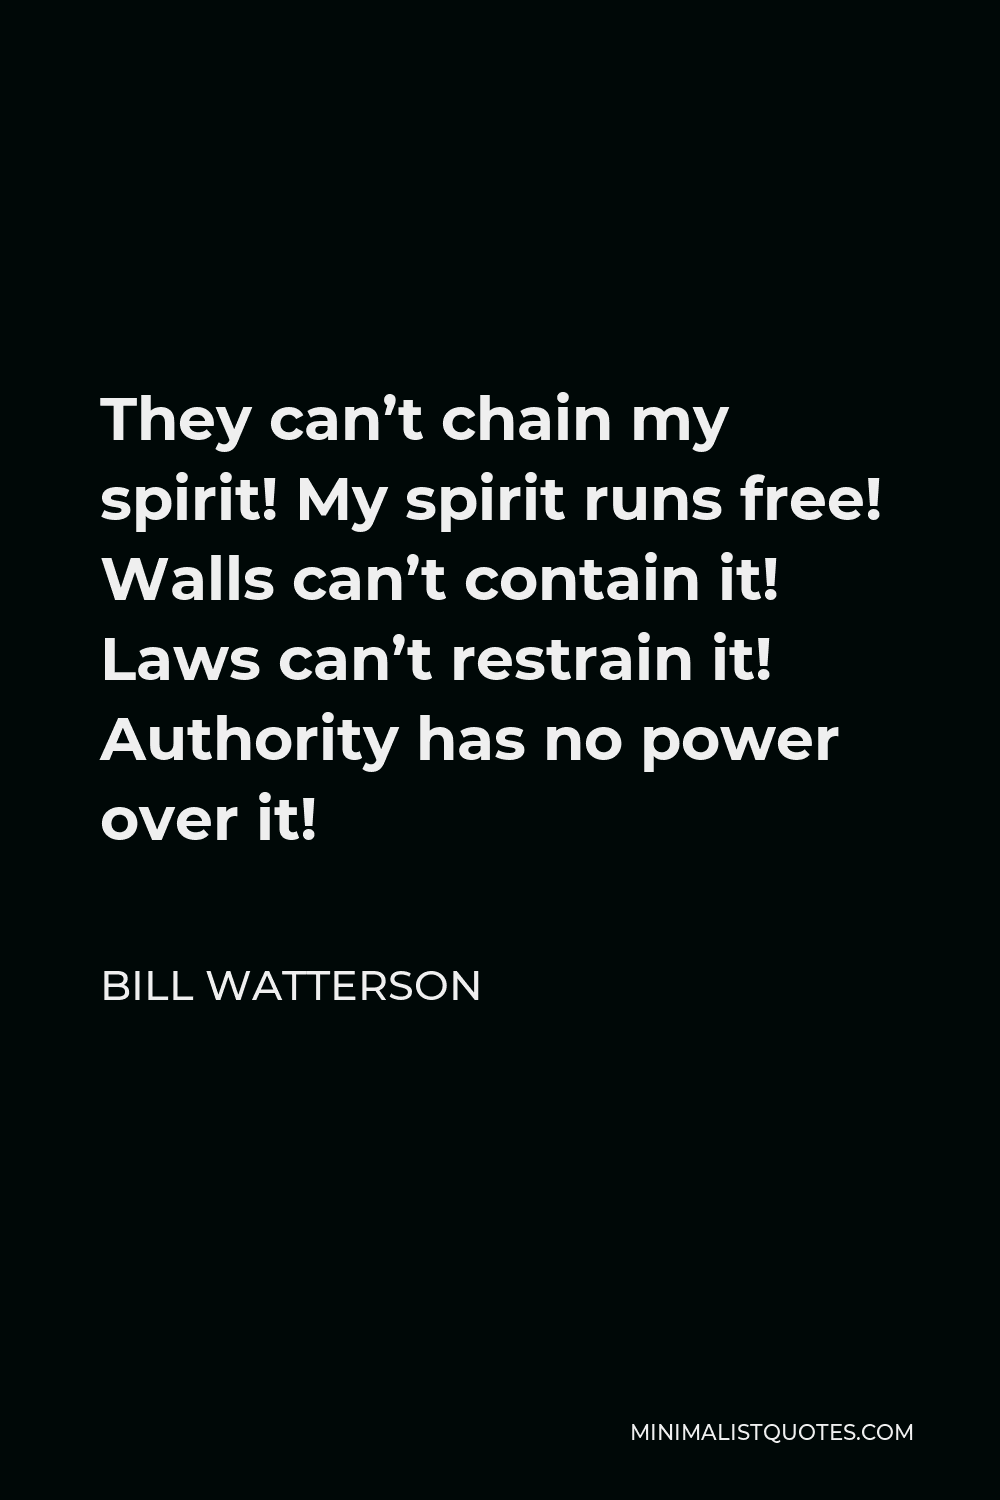 Bill Watterson Quote - They can’t chain my spirit! My spirit runs free! Walls can’t contain it! Laws can’t restrain it! Authority has no power over it!